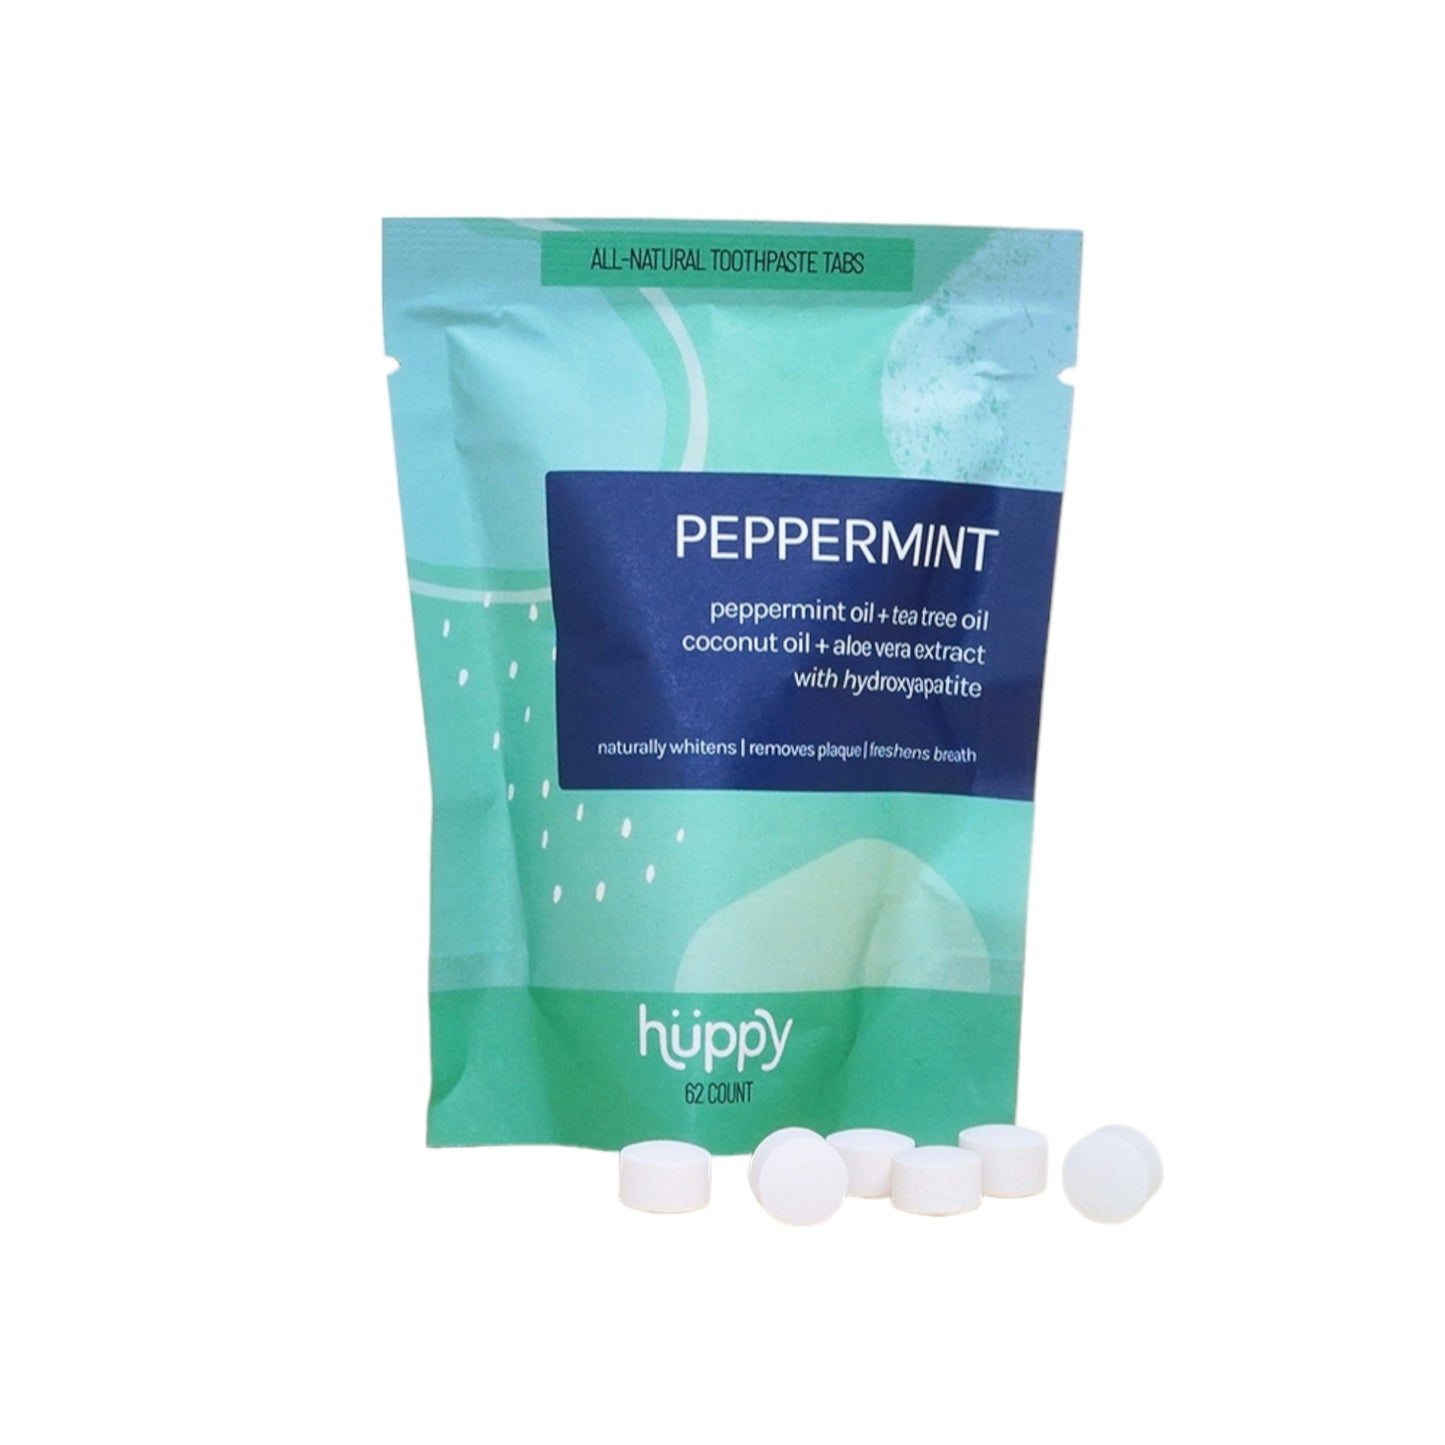 Toothpaste Tablets | Peppermint